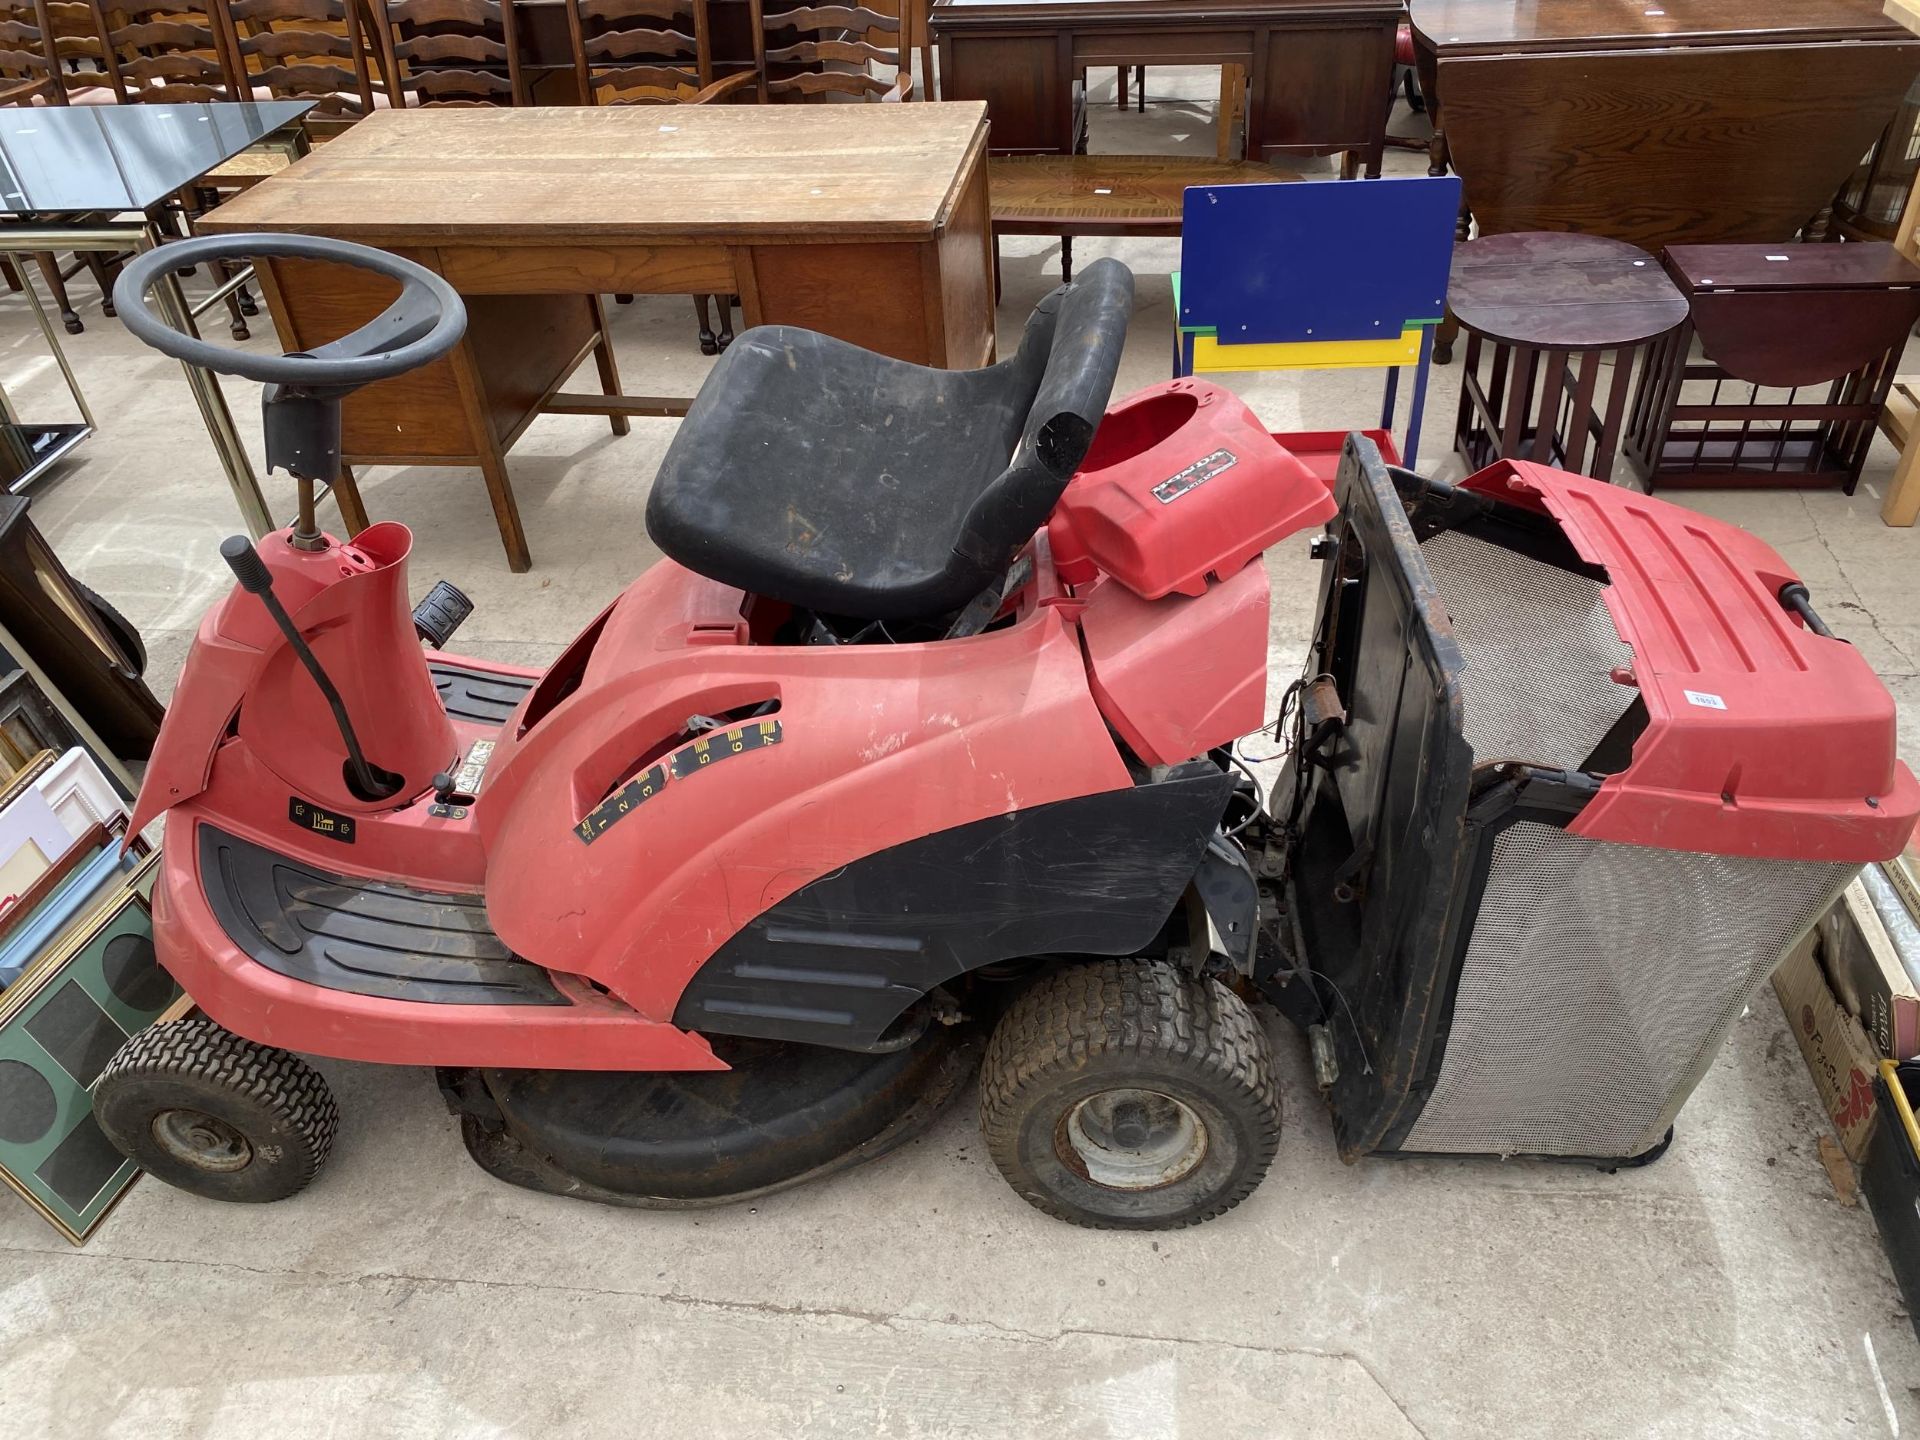 A HONDA 1211 RIDE ON LAWN MOWER WITH GRASS BOX FOR SPARES AND REPAIRS